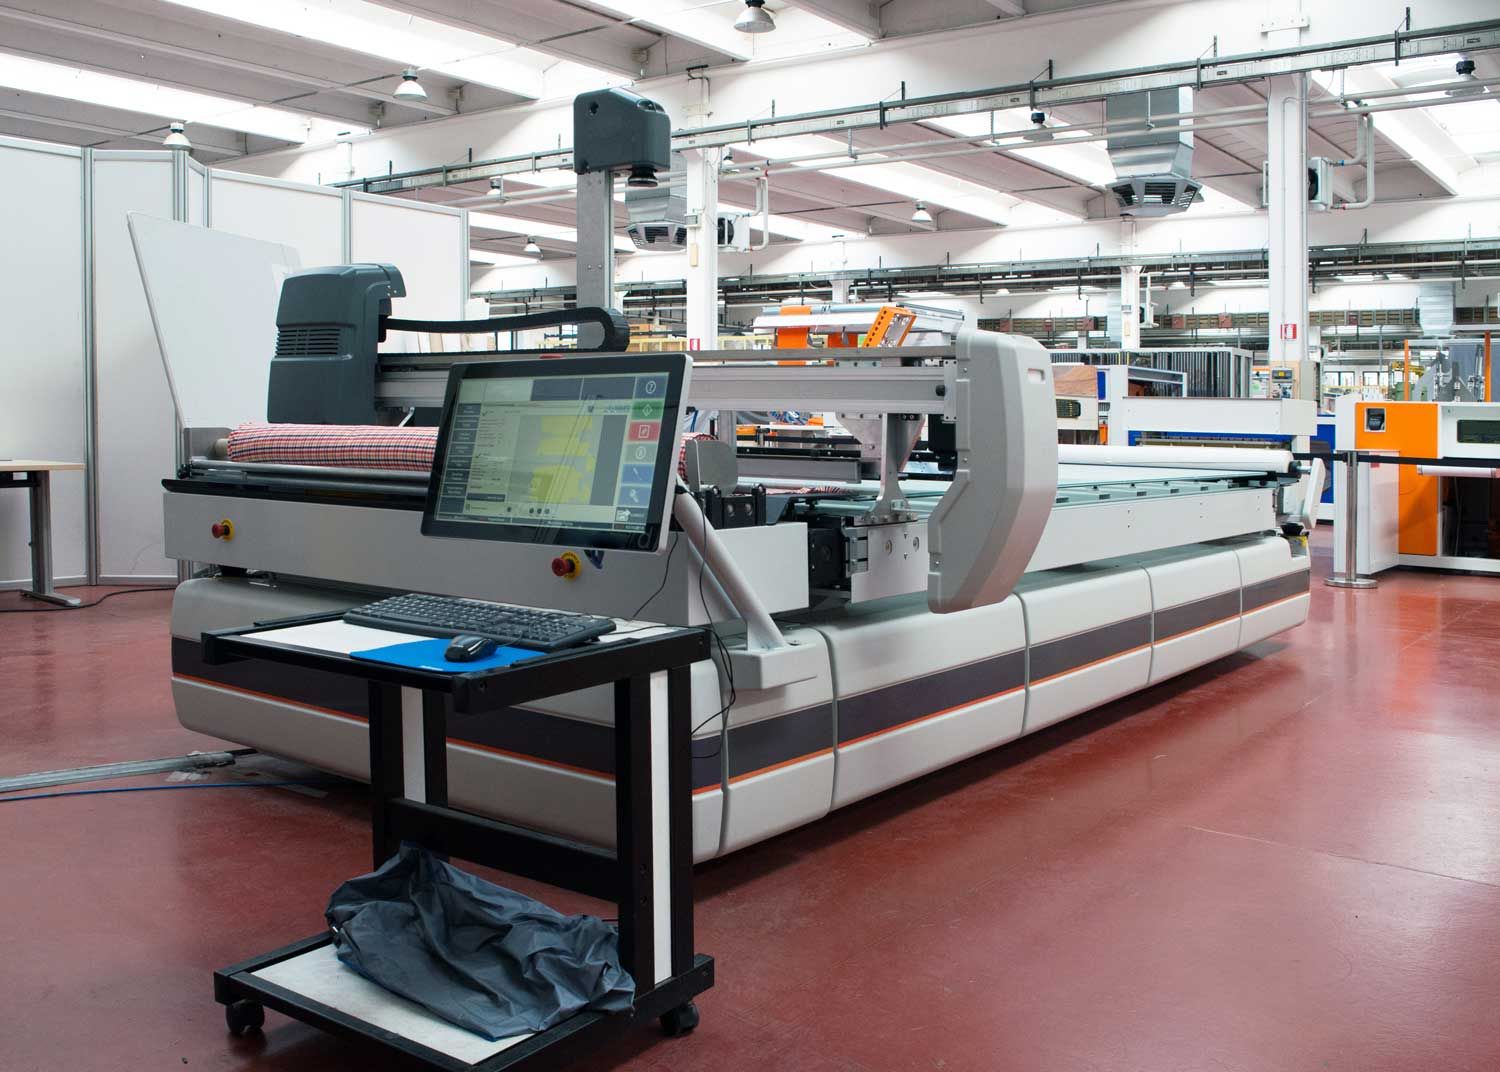 Image of an industrial laser cutting machine for fabric